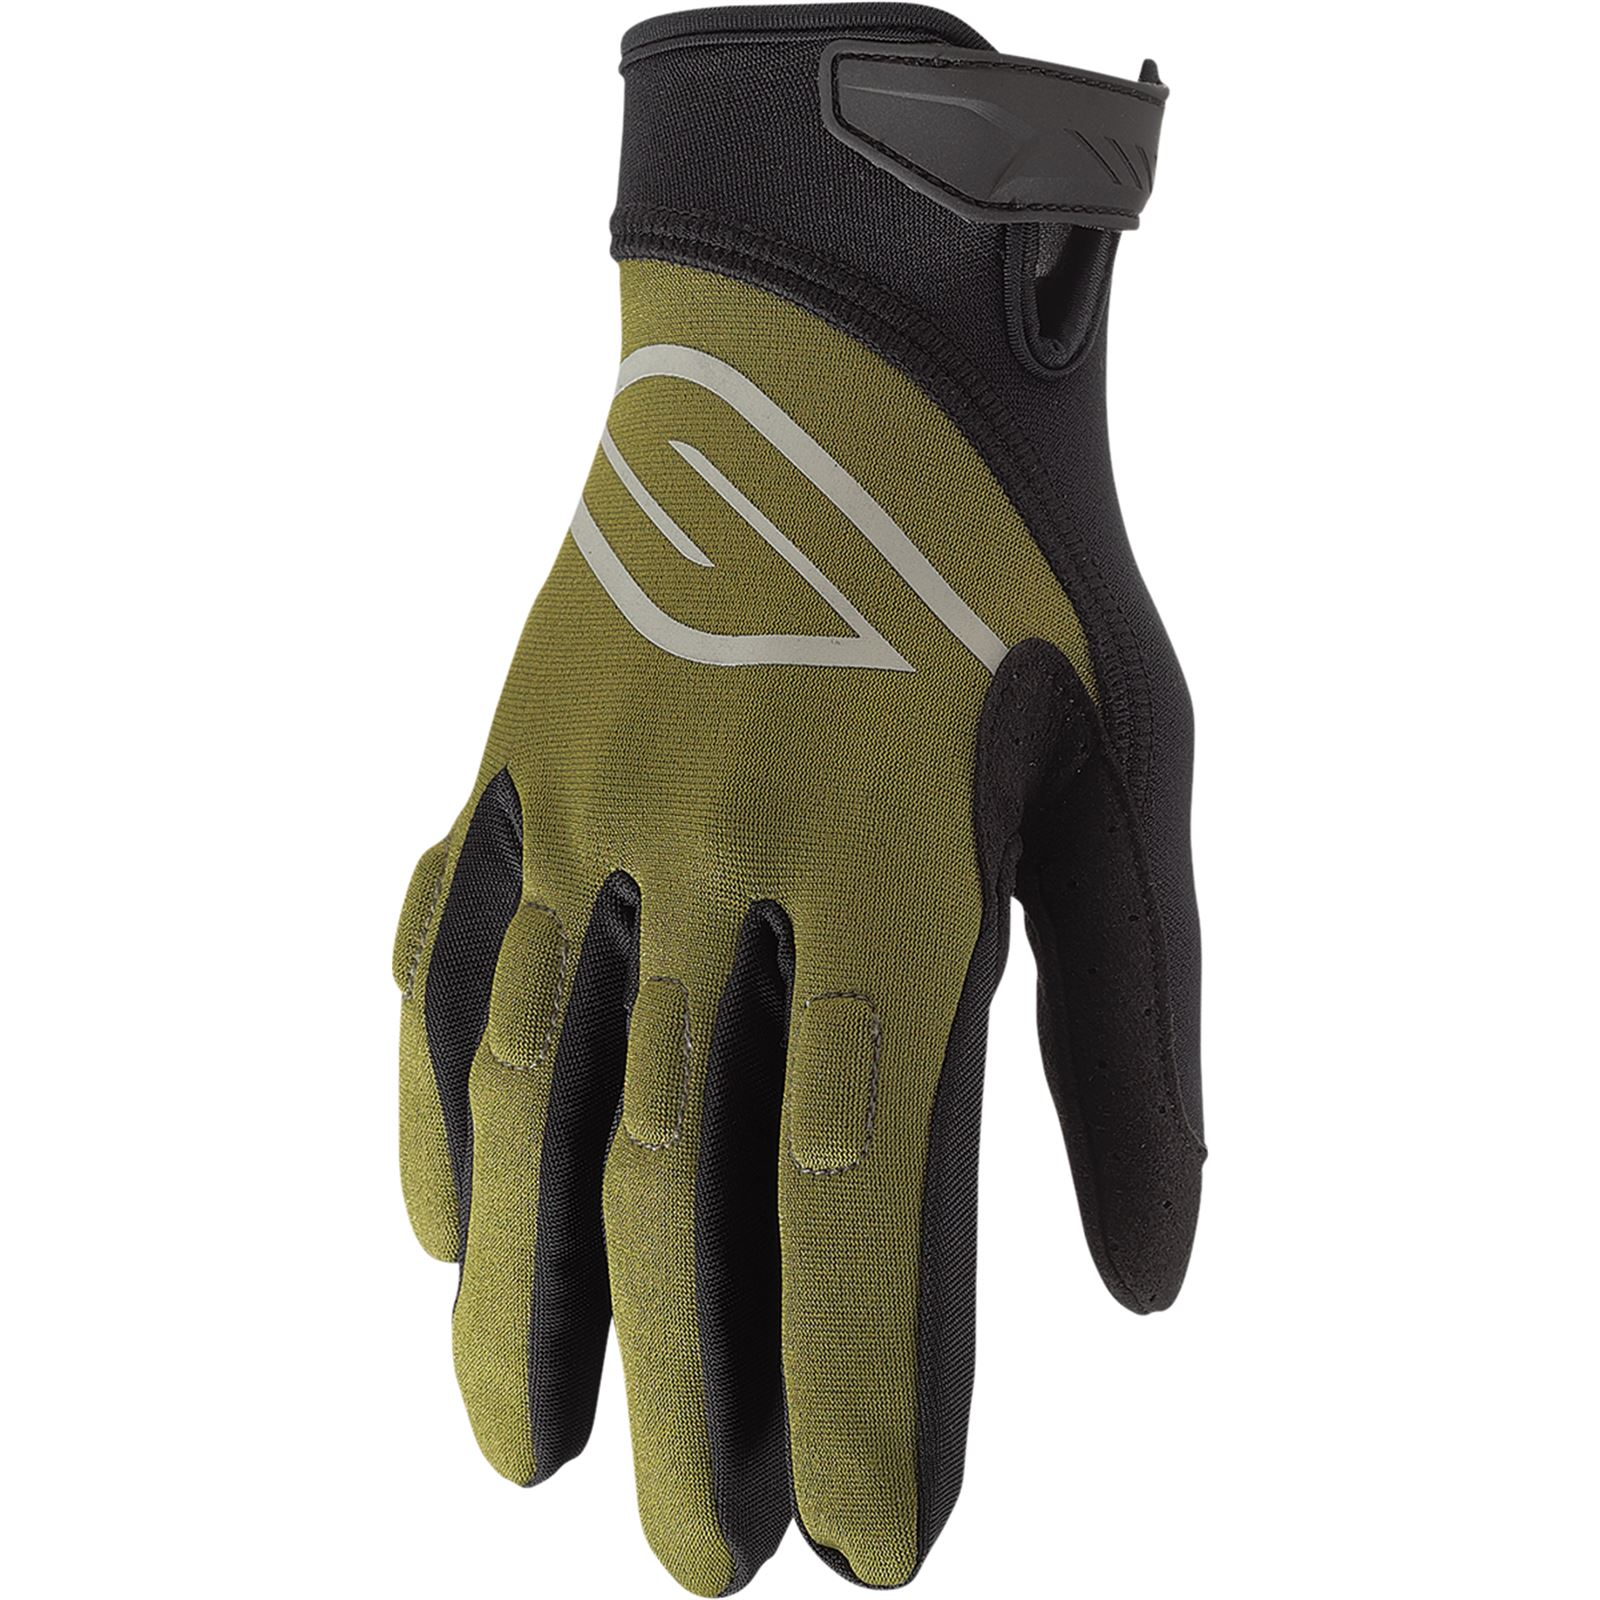 Slippery Circuit Gloves - Olive/Black - Small